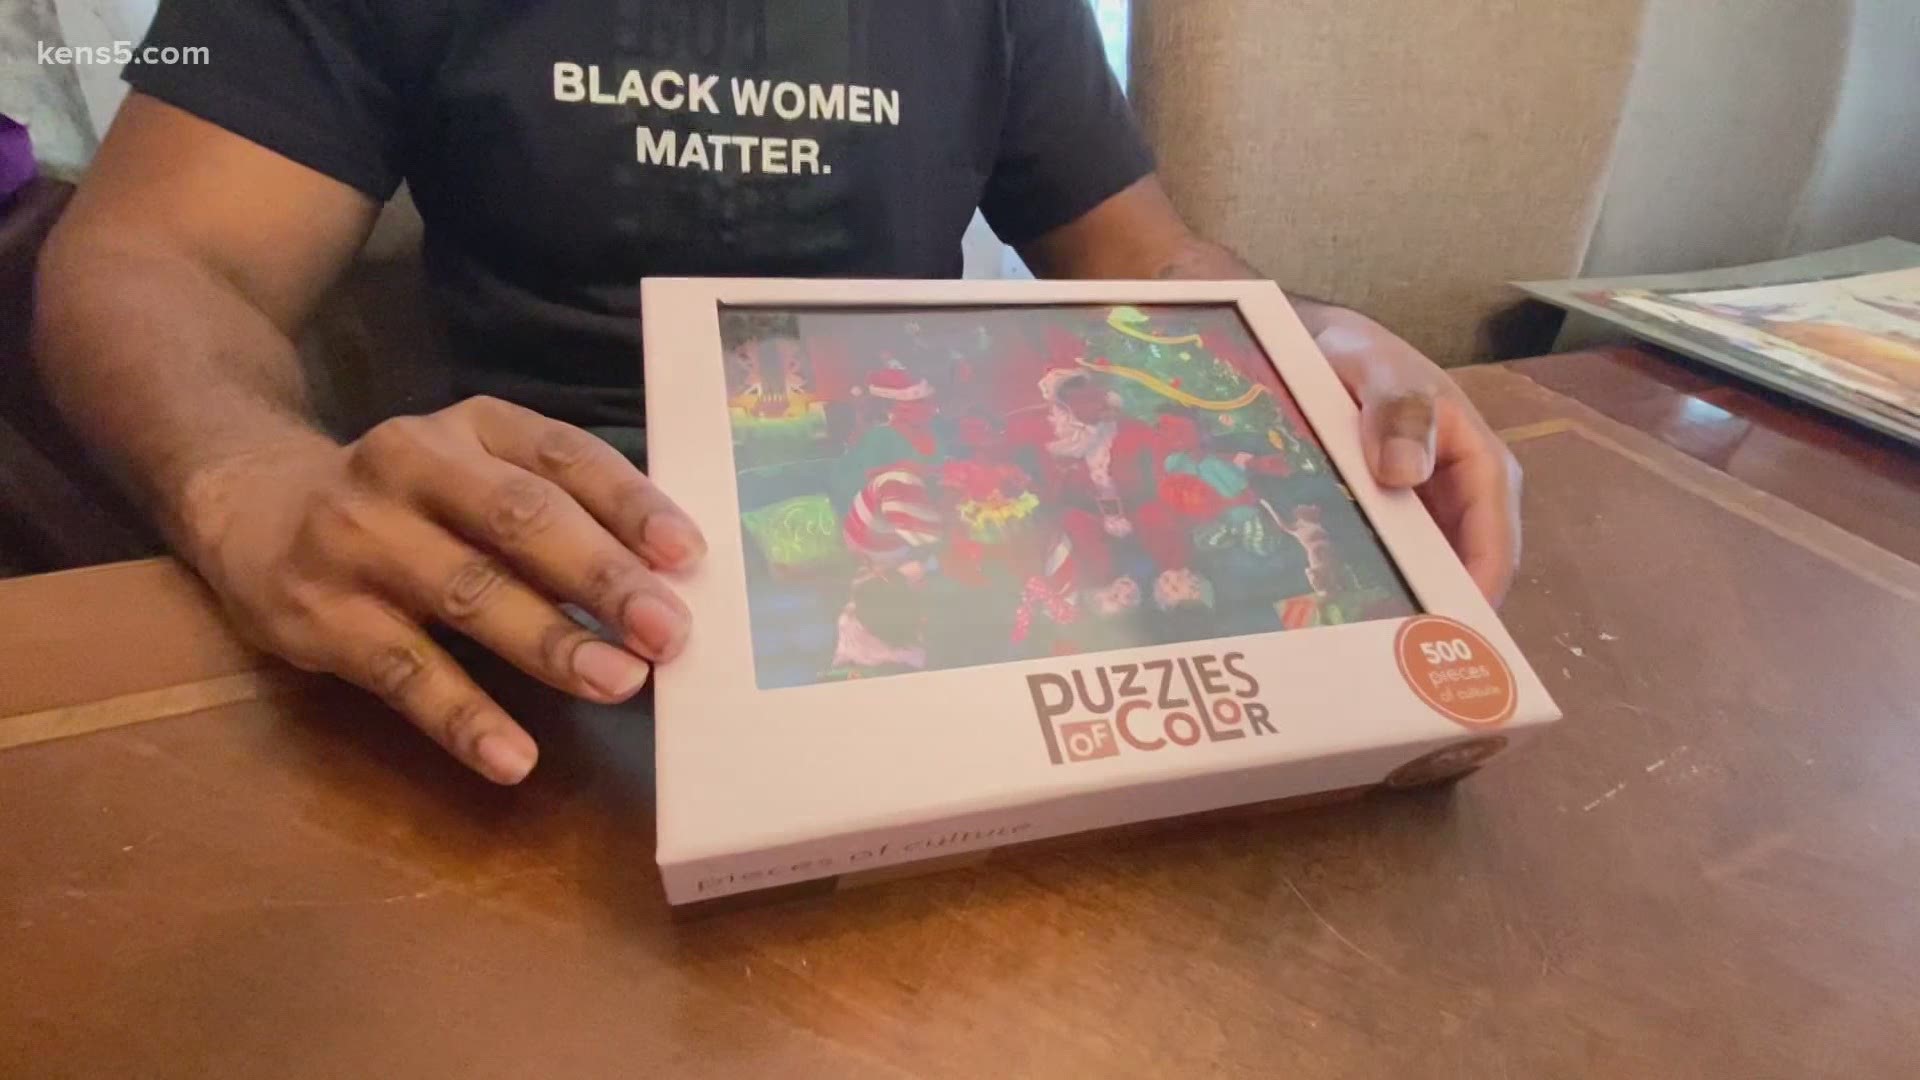 The puzzle company’s mission is to address a lack of representation of people of color – and to give families a tech-free way to connect with each other.